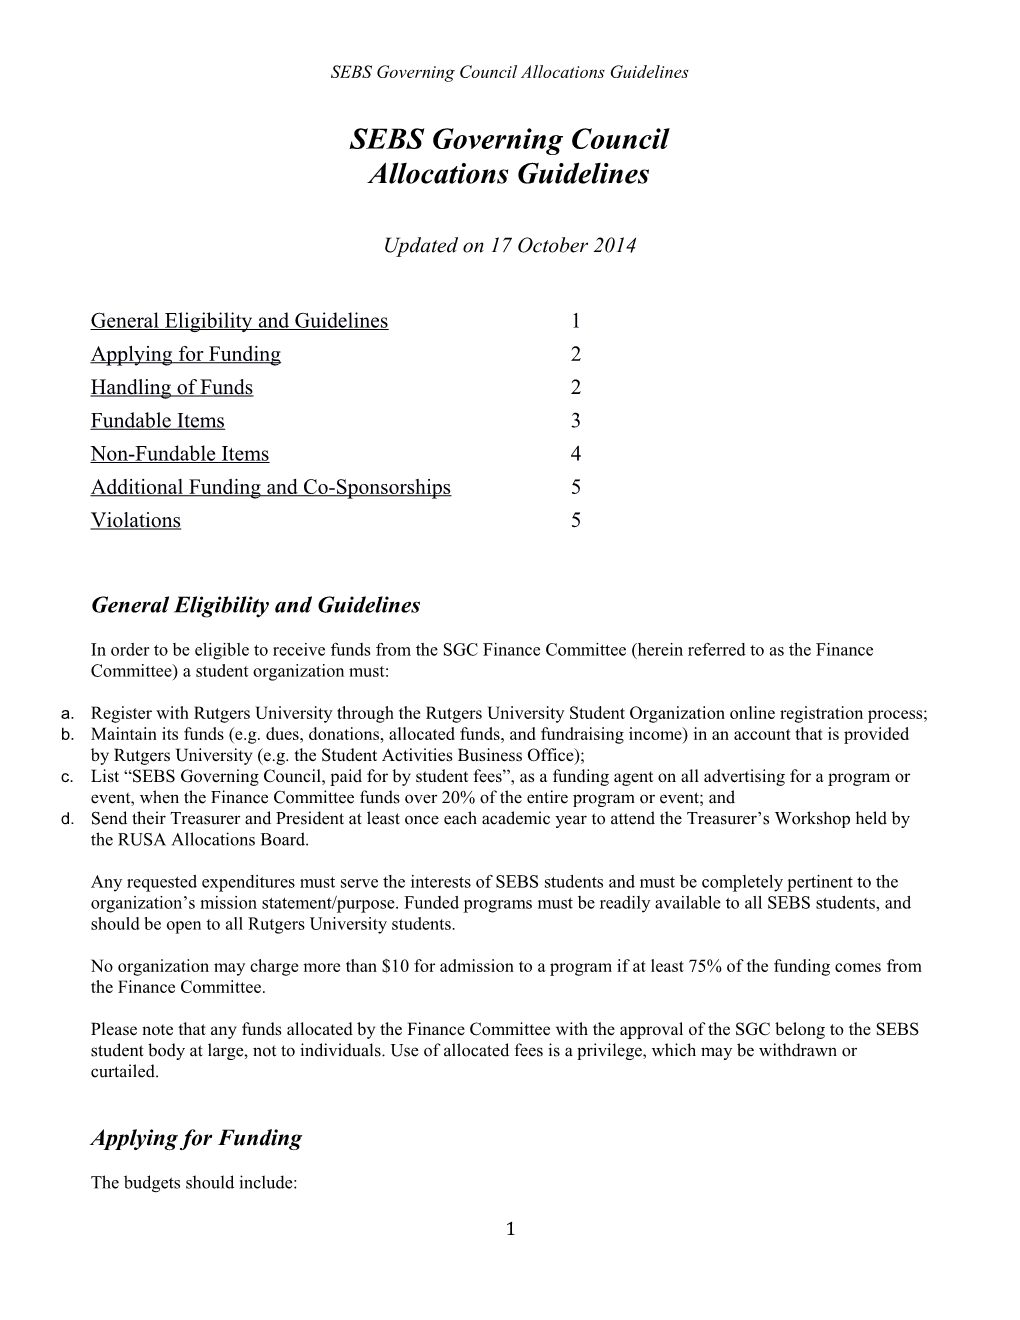 Updated SGC Allocations Guidelines